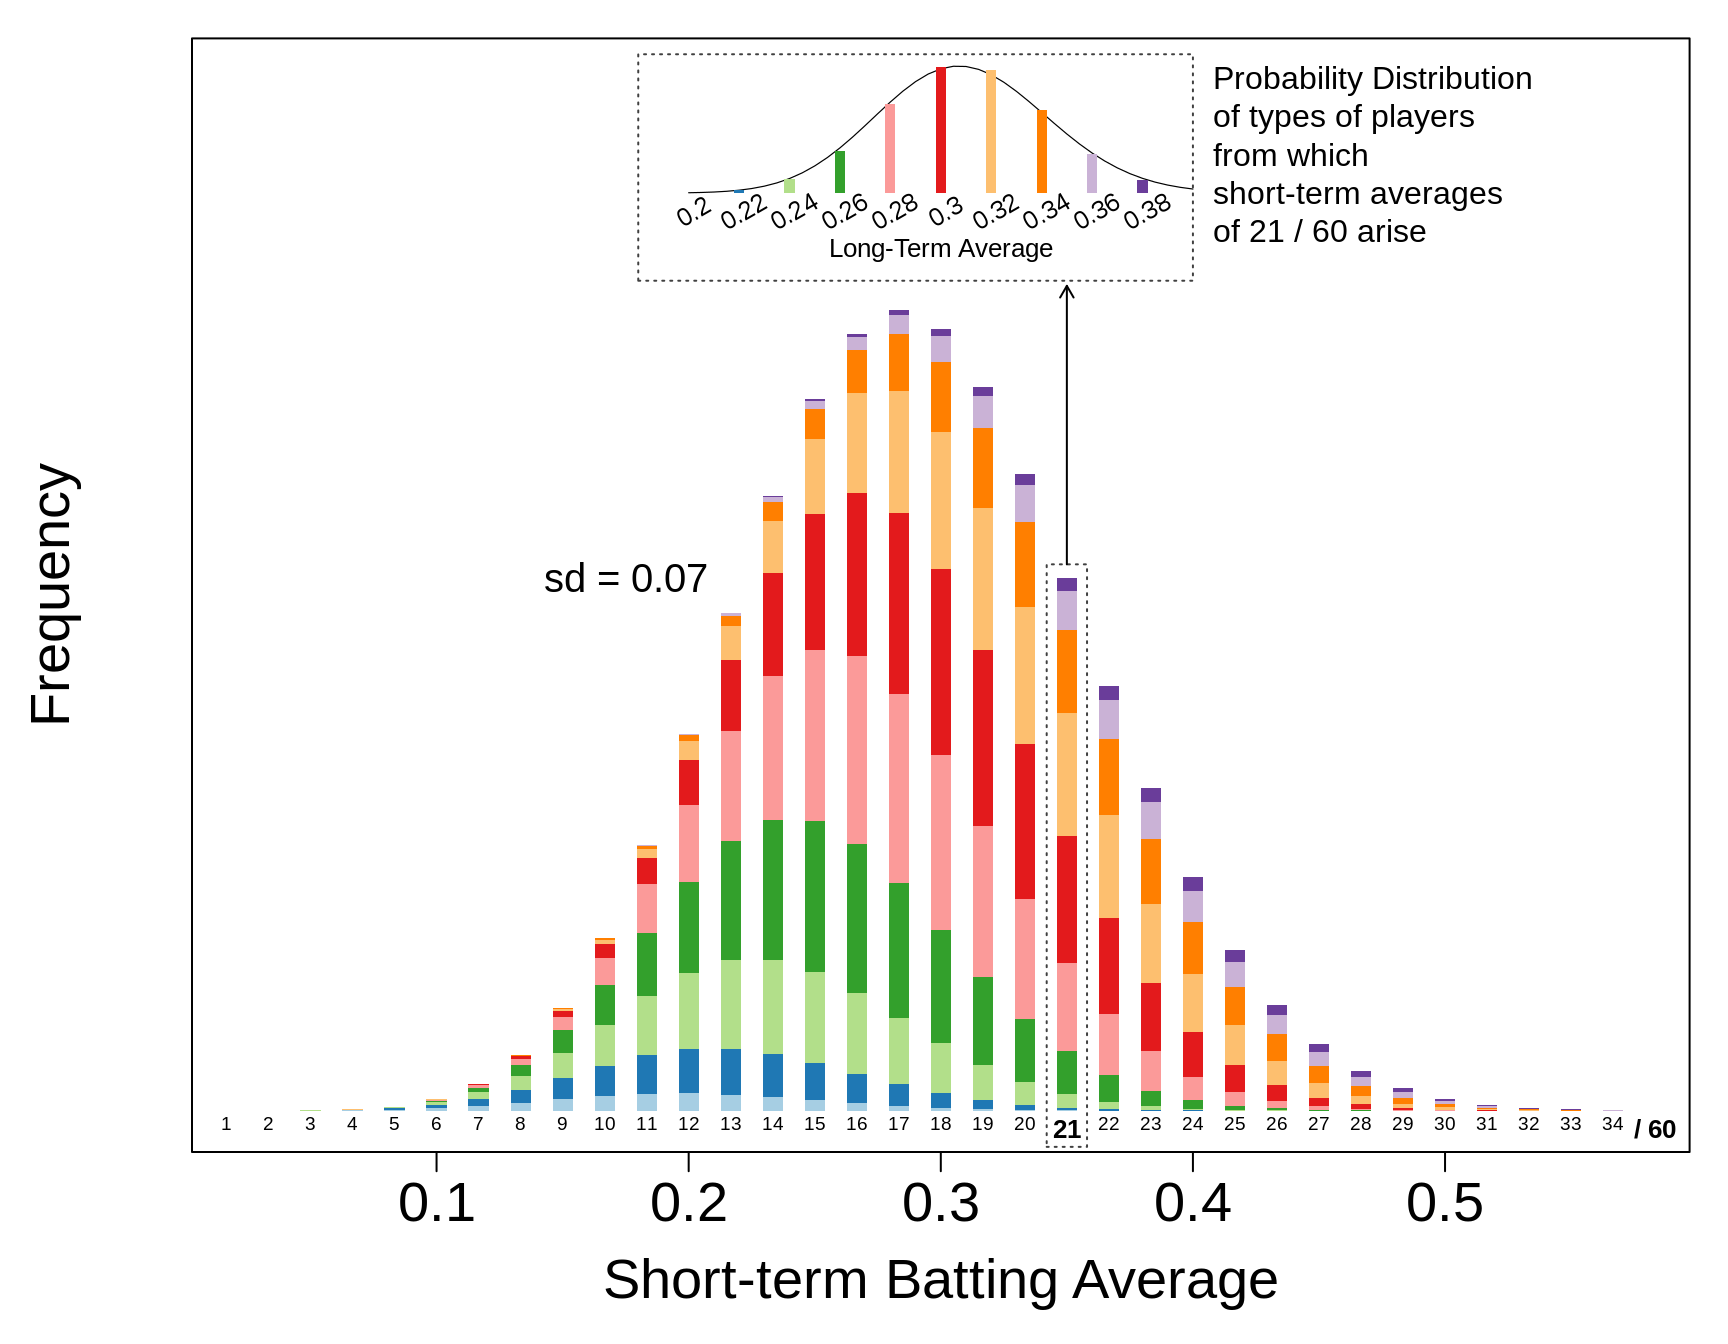 The bottom frequency distribution shows the expected frequencies of Short-term Batting averages from _n_ = 60 at bats by types of players shown in previous figure. For each possible short-term average, the colours of their components  show their 'provenance', i.e., which types of player this average arises from, and the relative contributions from each type. **As an example, highlighted, within the column enclosed by a dashed line,  is the provenance of the short-term averages that equal 21/60 = 0.350**. In a real application, after n=60, IF ALL ONE KNEW WAS THE 21/60, one would not know which type of player, i.e., which colour, one was observing. Nevertheless, the theoretical calculations show that a **short-term average of 21/60 = 0.350 is more likely to have been produced by a player who bats 0.320 or 0.300 or even lower, that one who bats 0.350 or or 0.360 or higher.** Much more of the probability distribution lies to the left of the 0.350 than to the right of it! So we need to 'shrink' the observed 0.350 towards the 0.290.